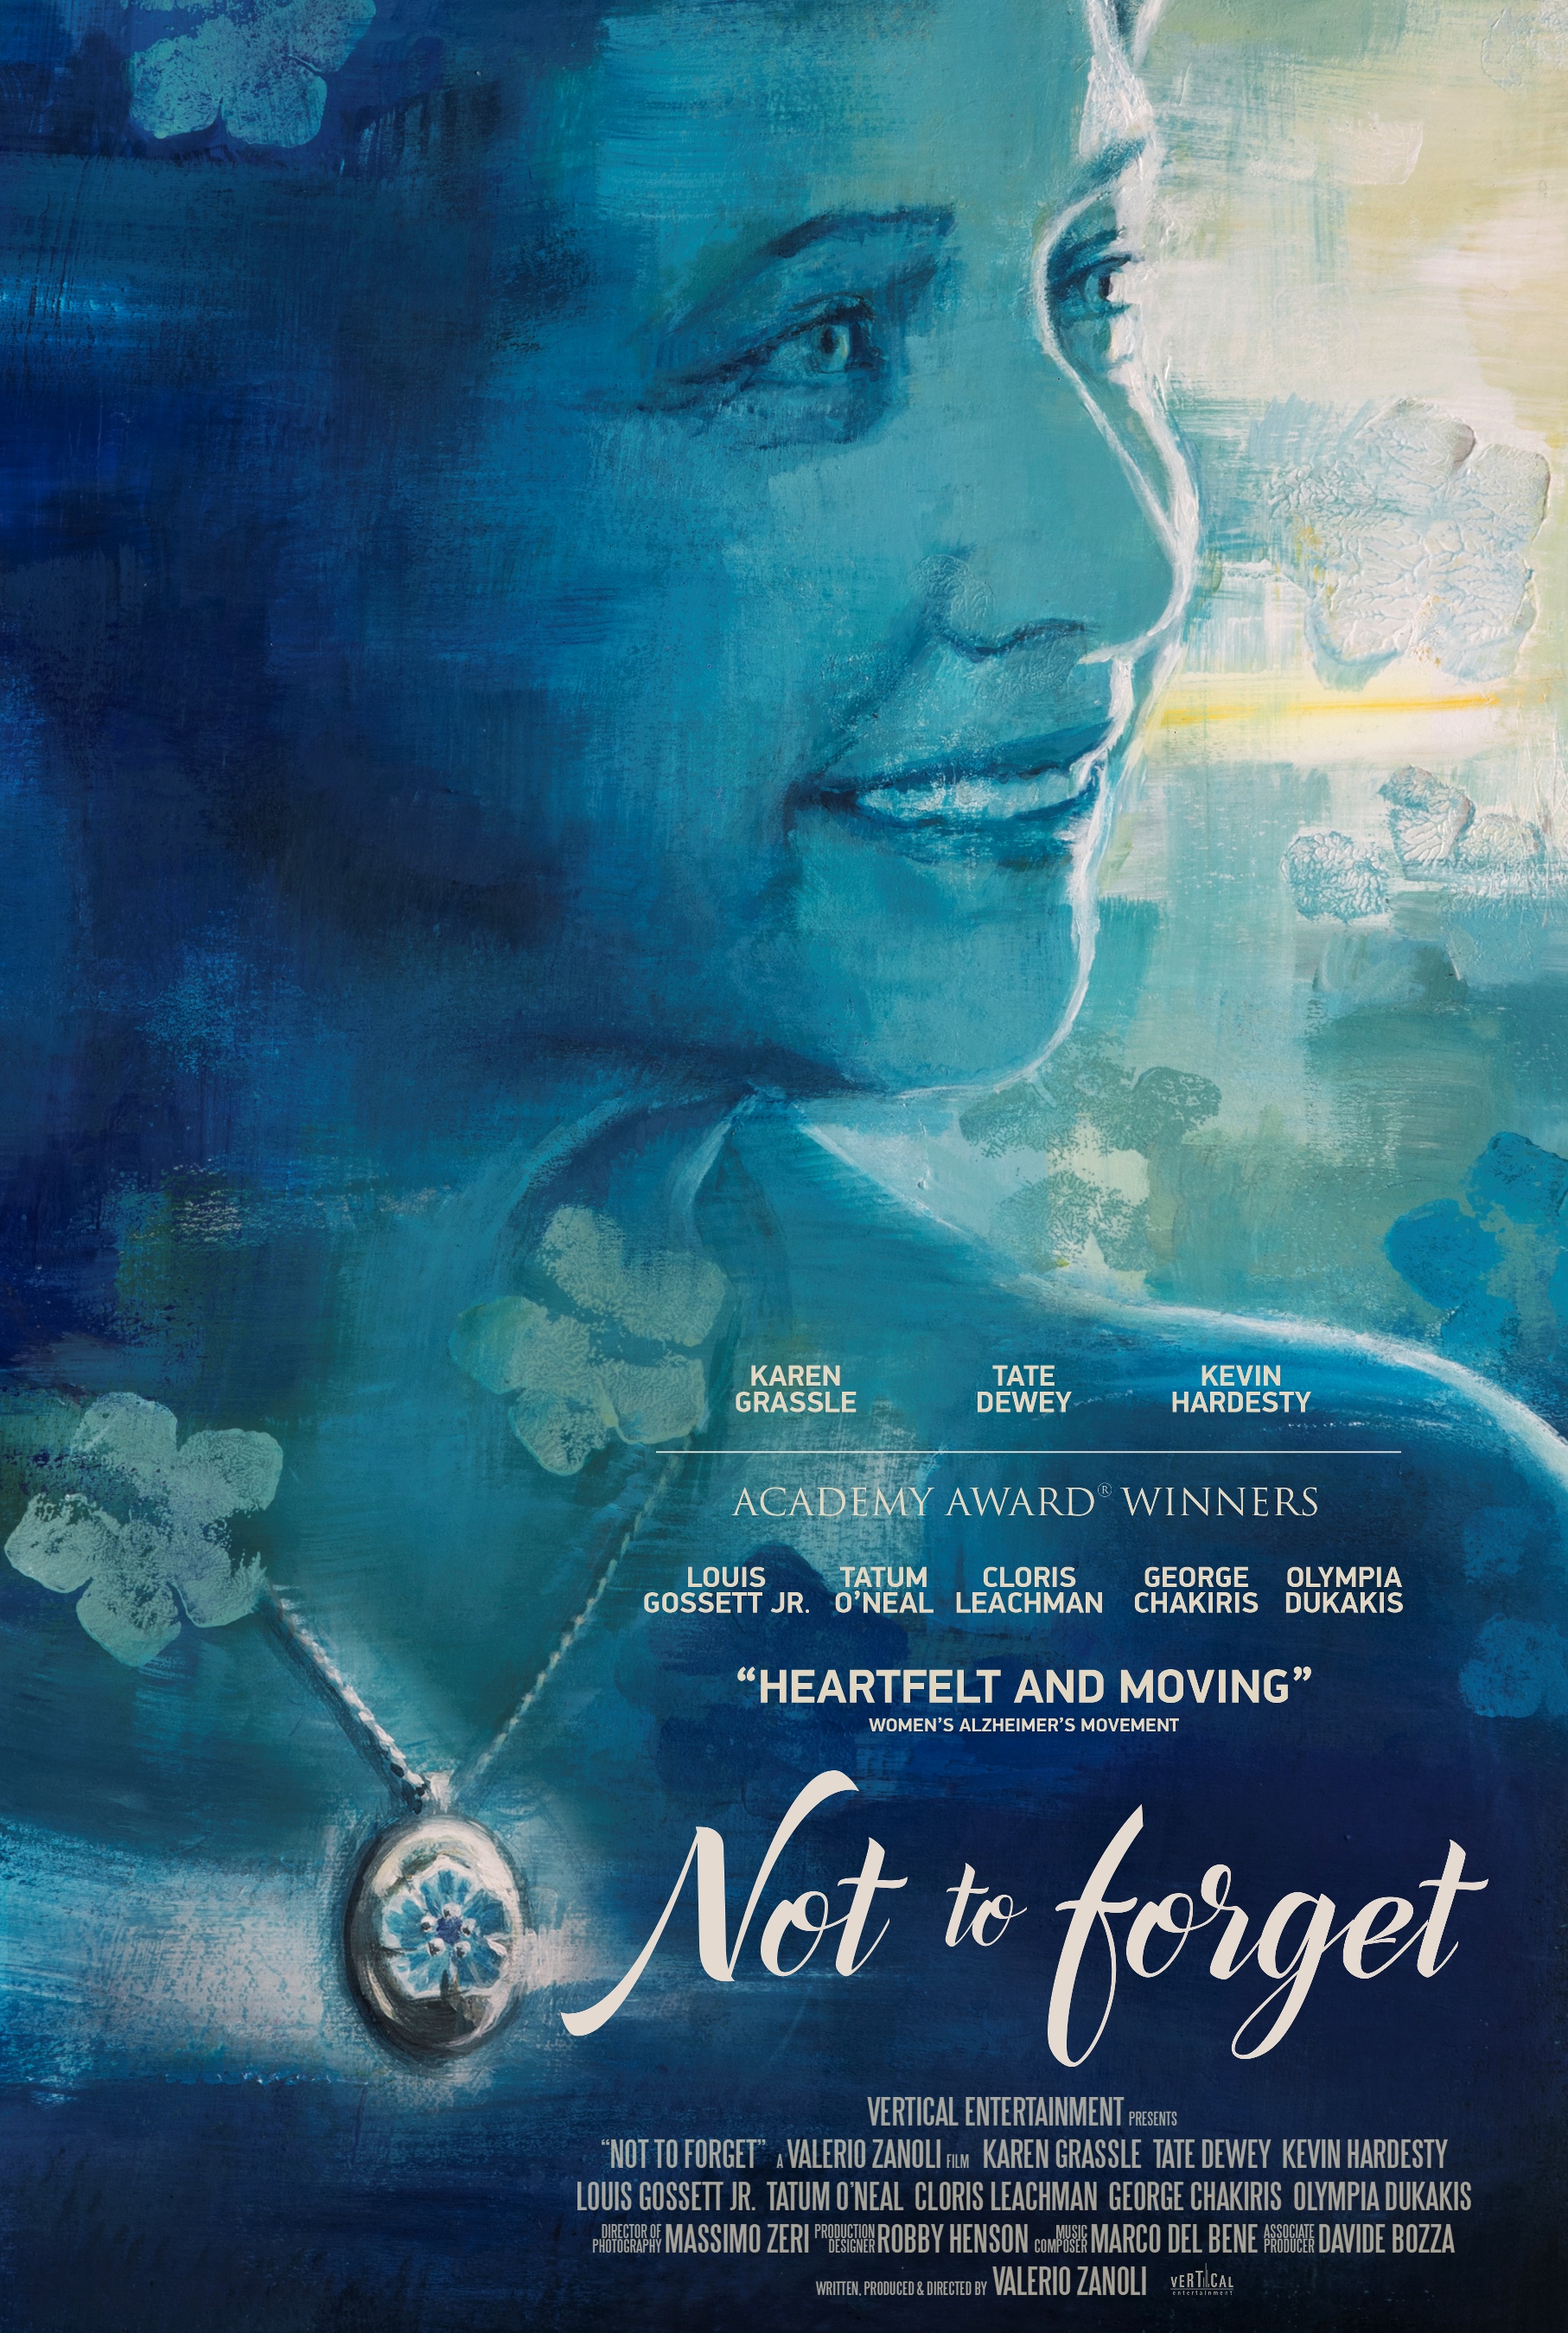 Vertical Entertainment Presents Not to Forget, a Valerio Zanoli Film